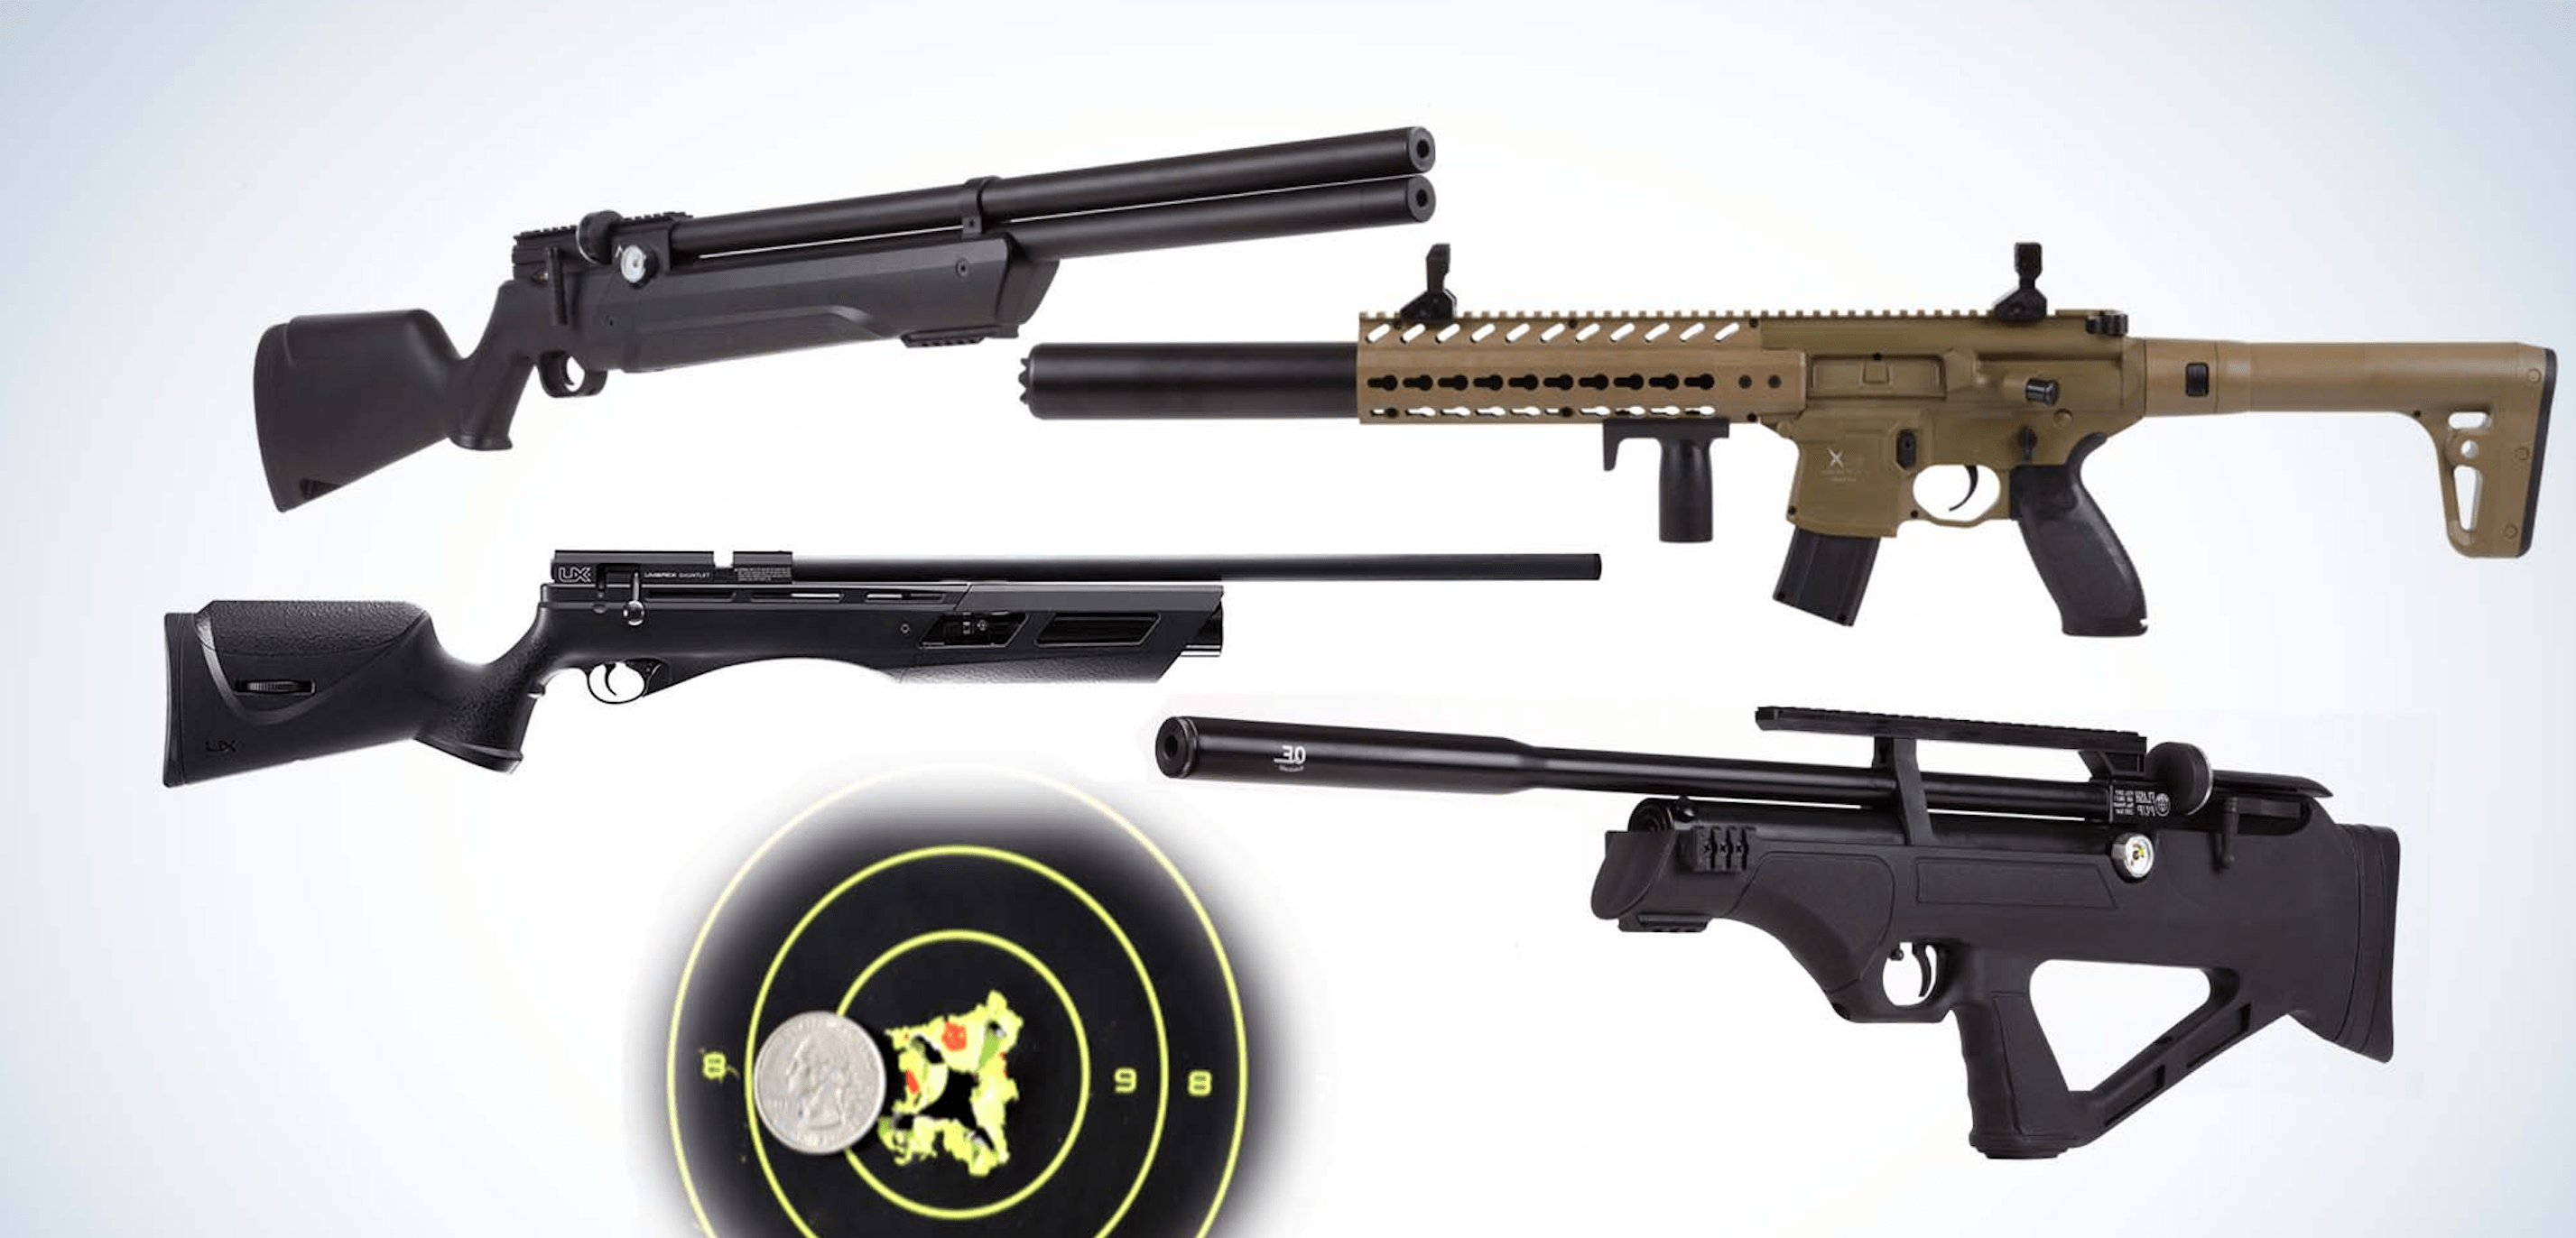 The Best Pellet Guns: Budget-Friendly Pellet Rifles for Target Shooting and Hunting